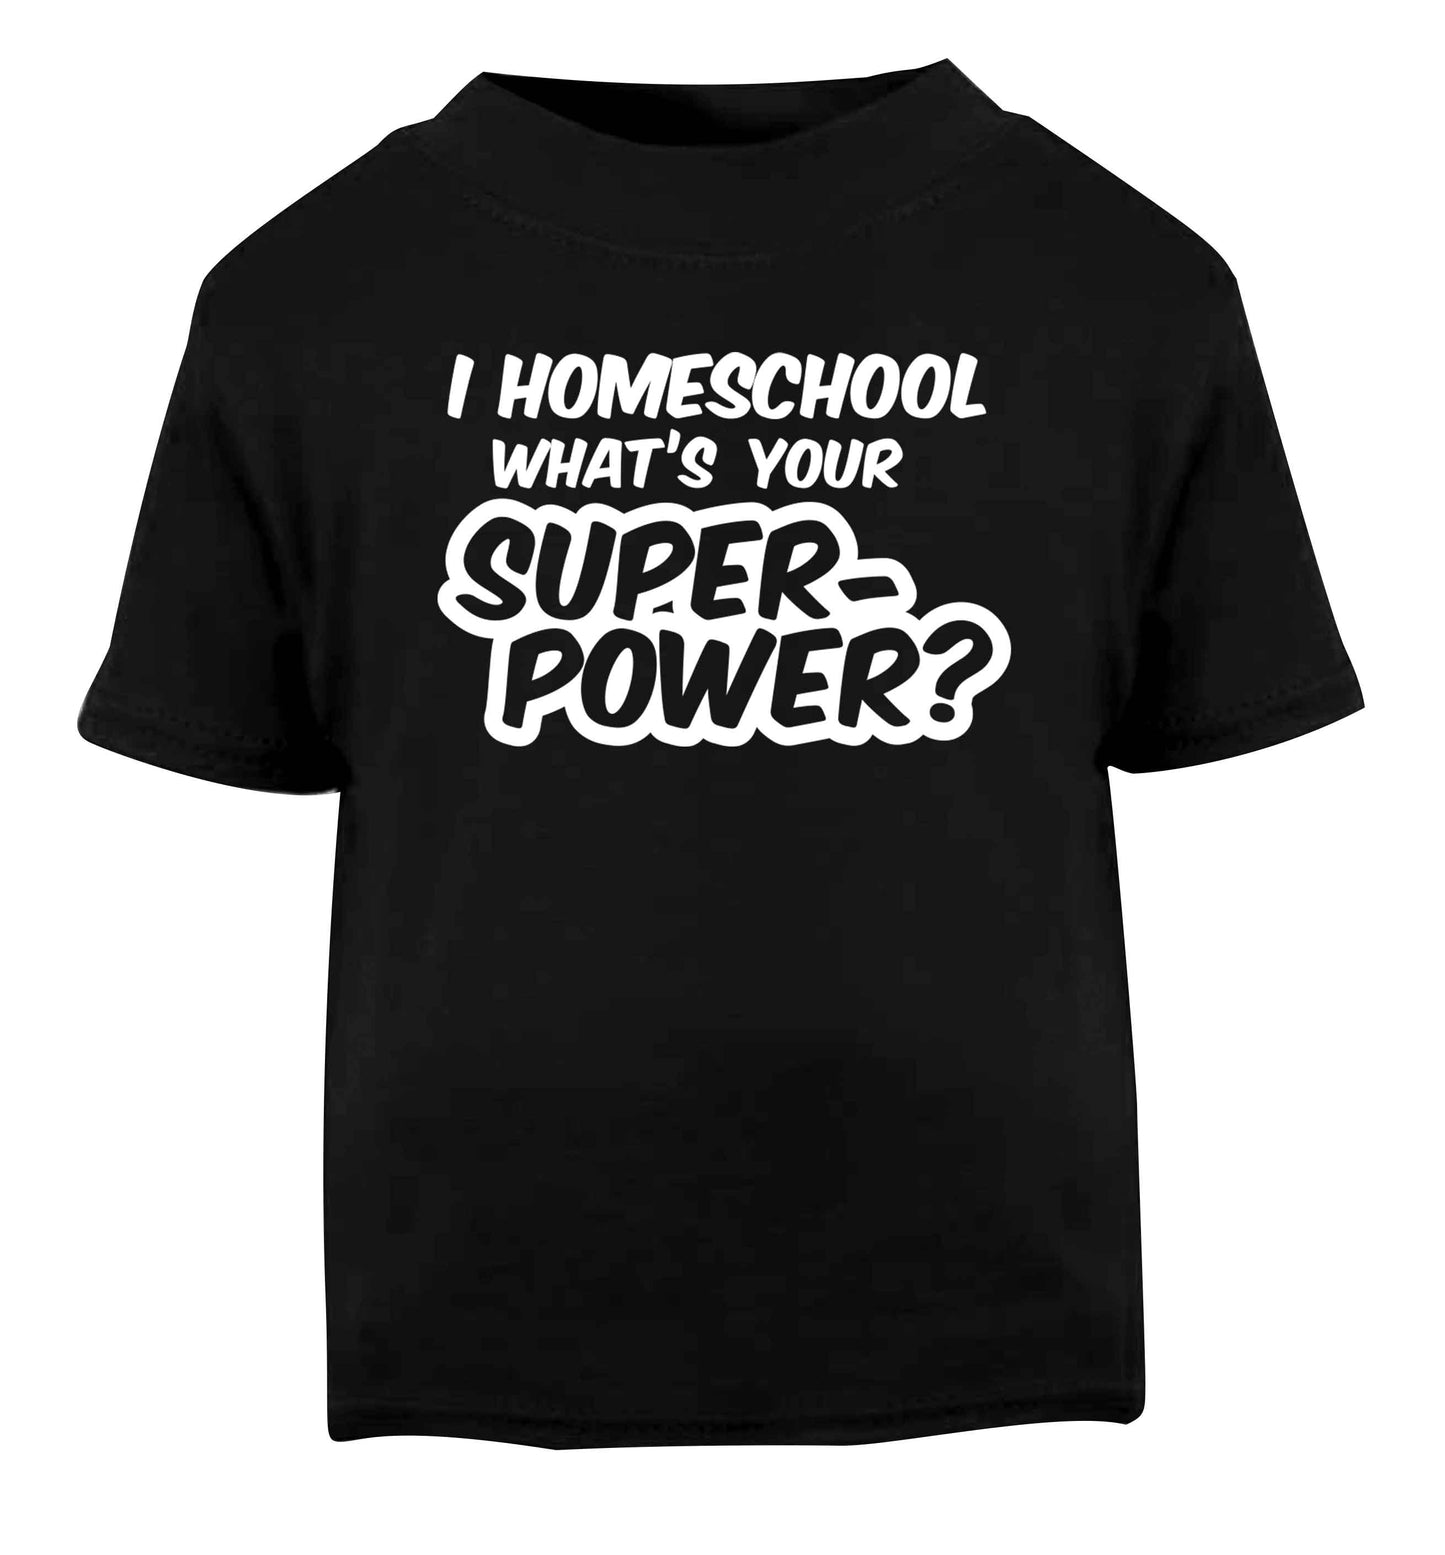 I homeschool what's your superpower? Black Baby Toddler Tshirt 2 years